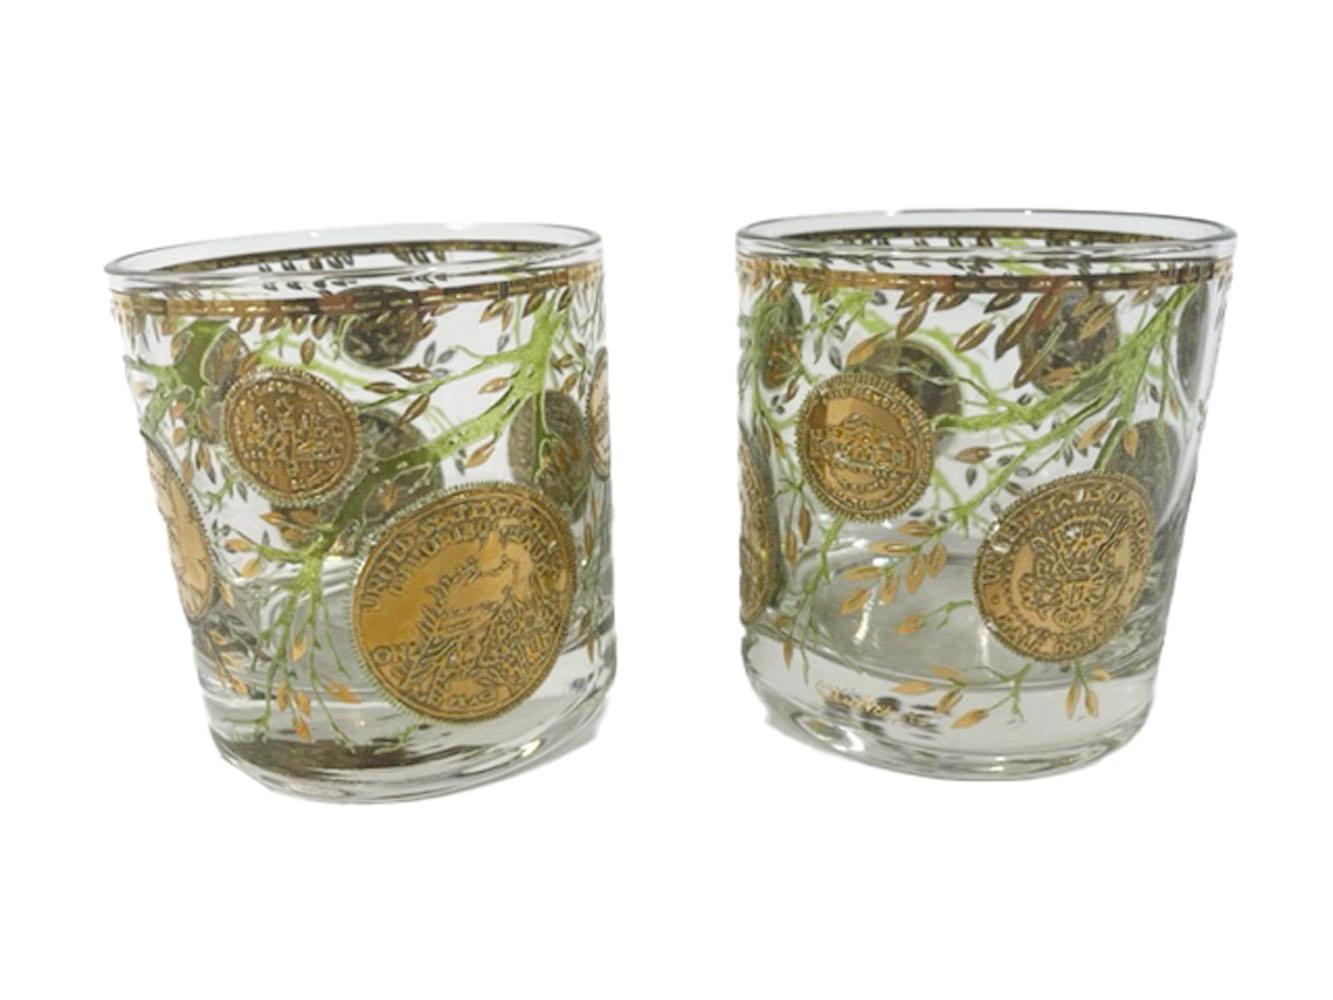 Six Culver LTD Rocks Glasses in the Gold Version of the Midas Pattern In Good Condition For Sale In Nantucket, MA